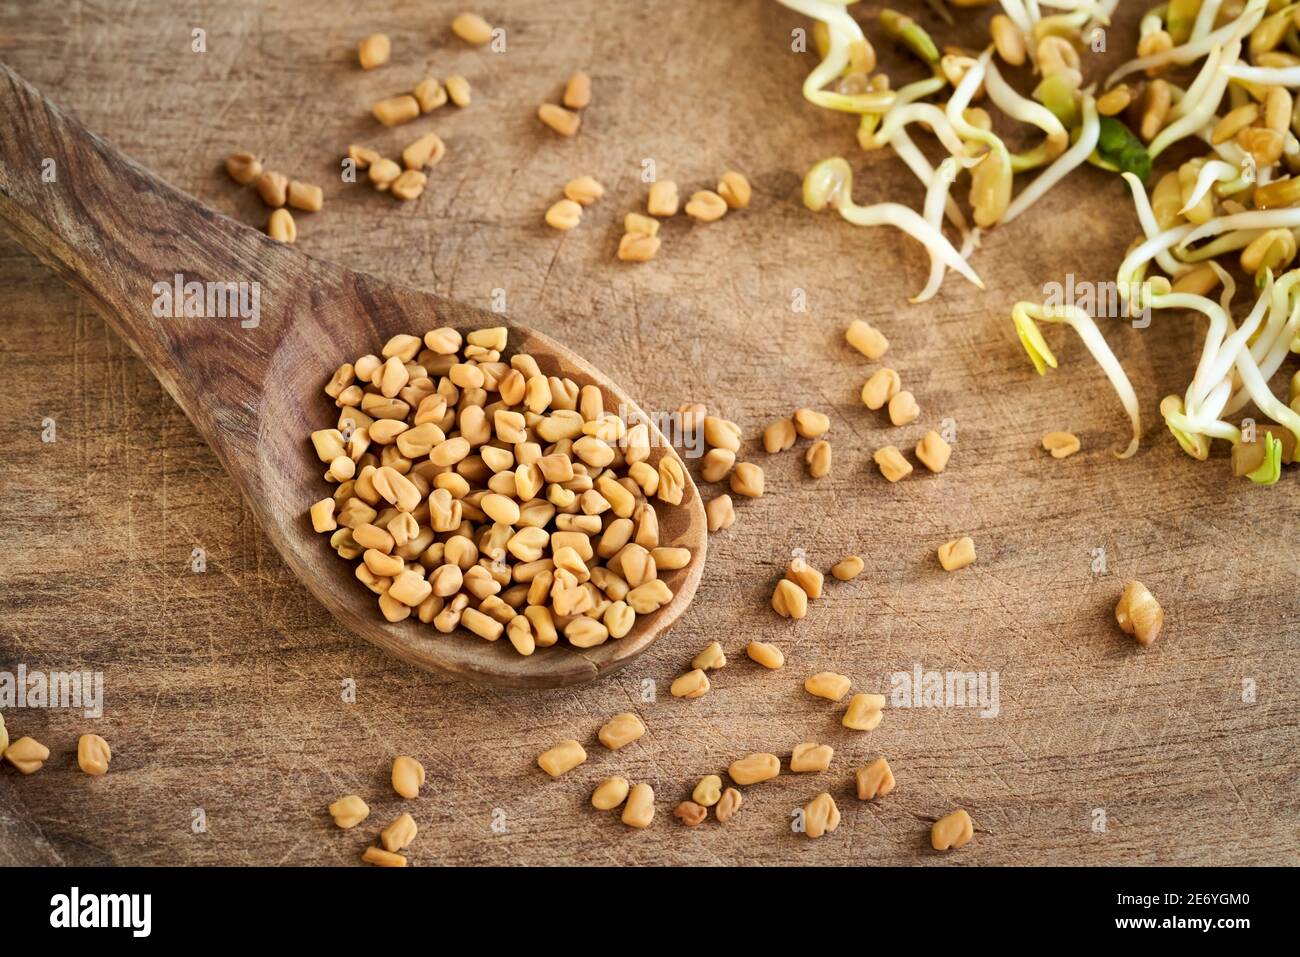 Dry fenugreek seeds on a spoon with three-day sprouts in the background Stock Photo